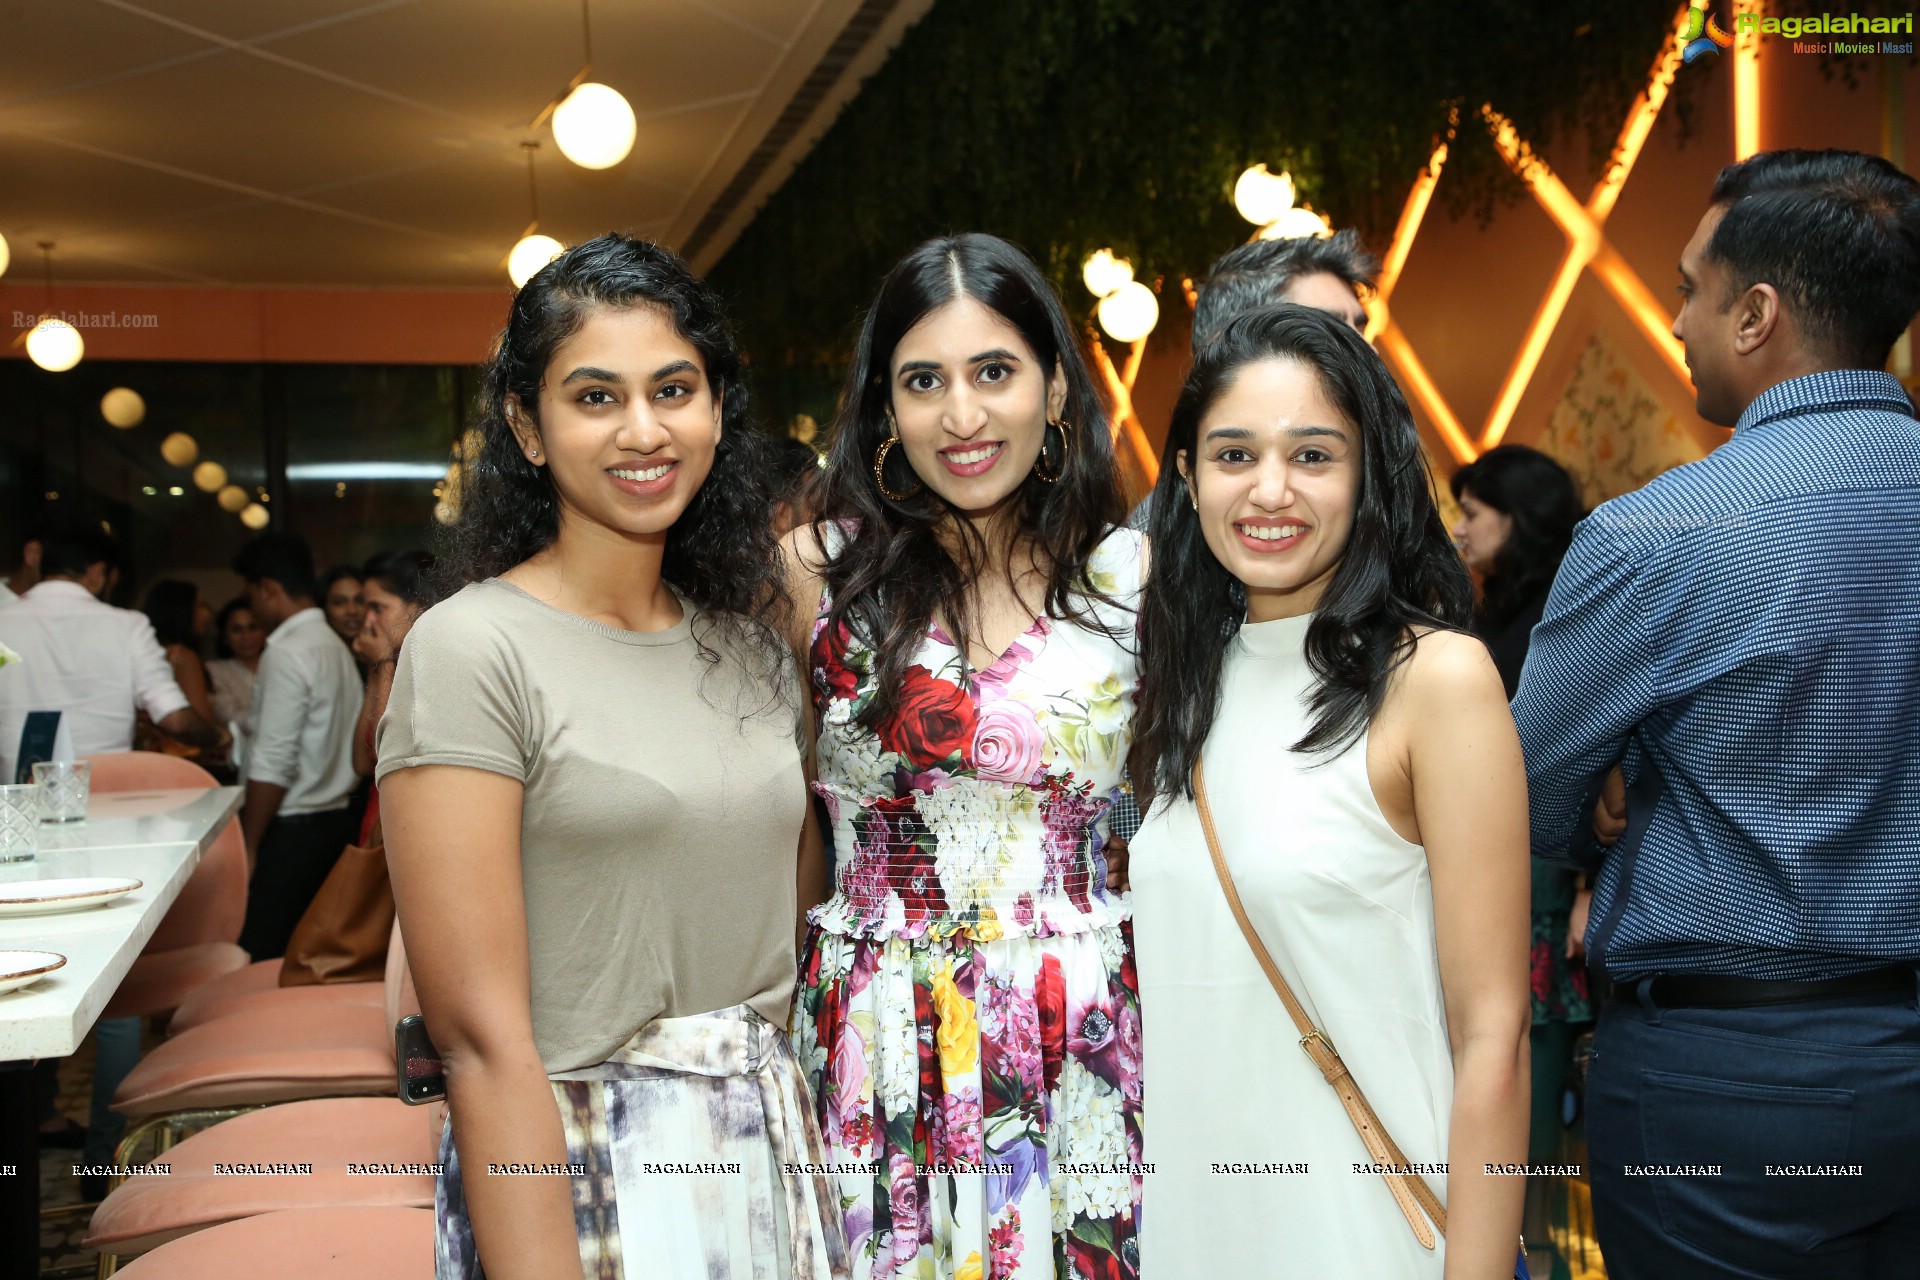 Tiger Lily - Cafe and Bistro Launch